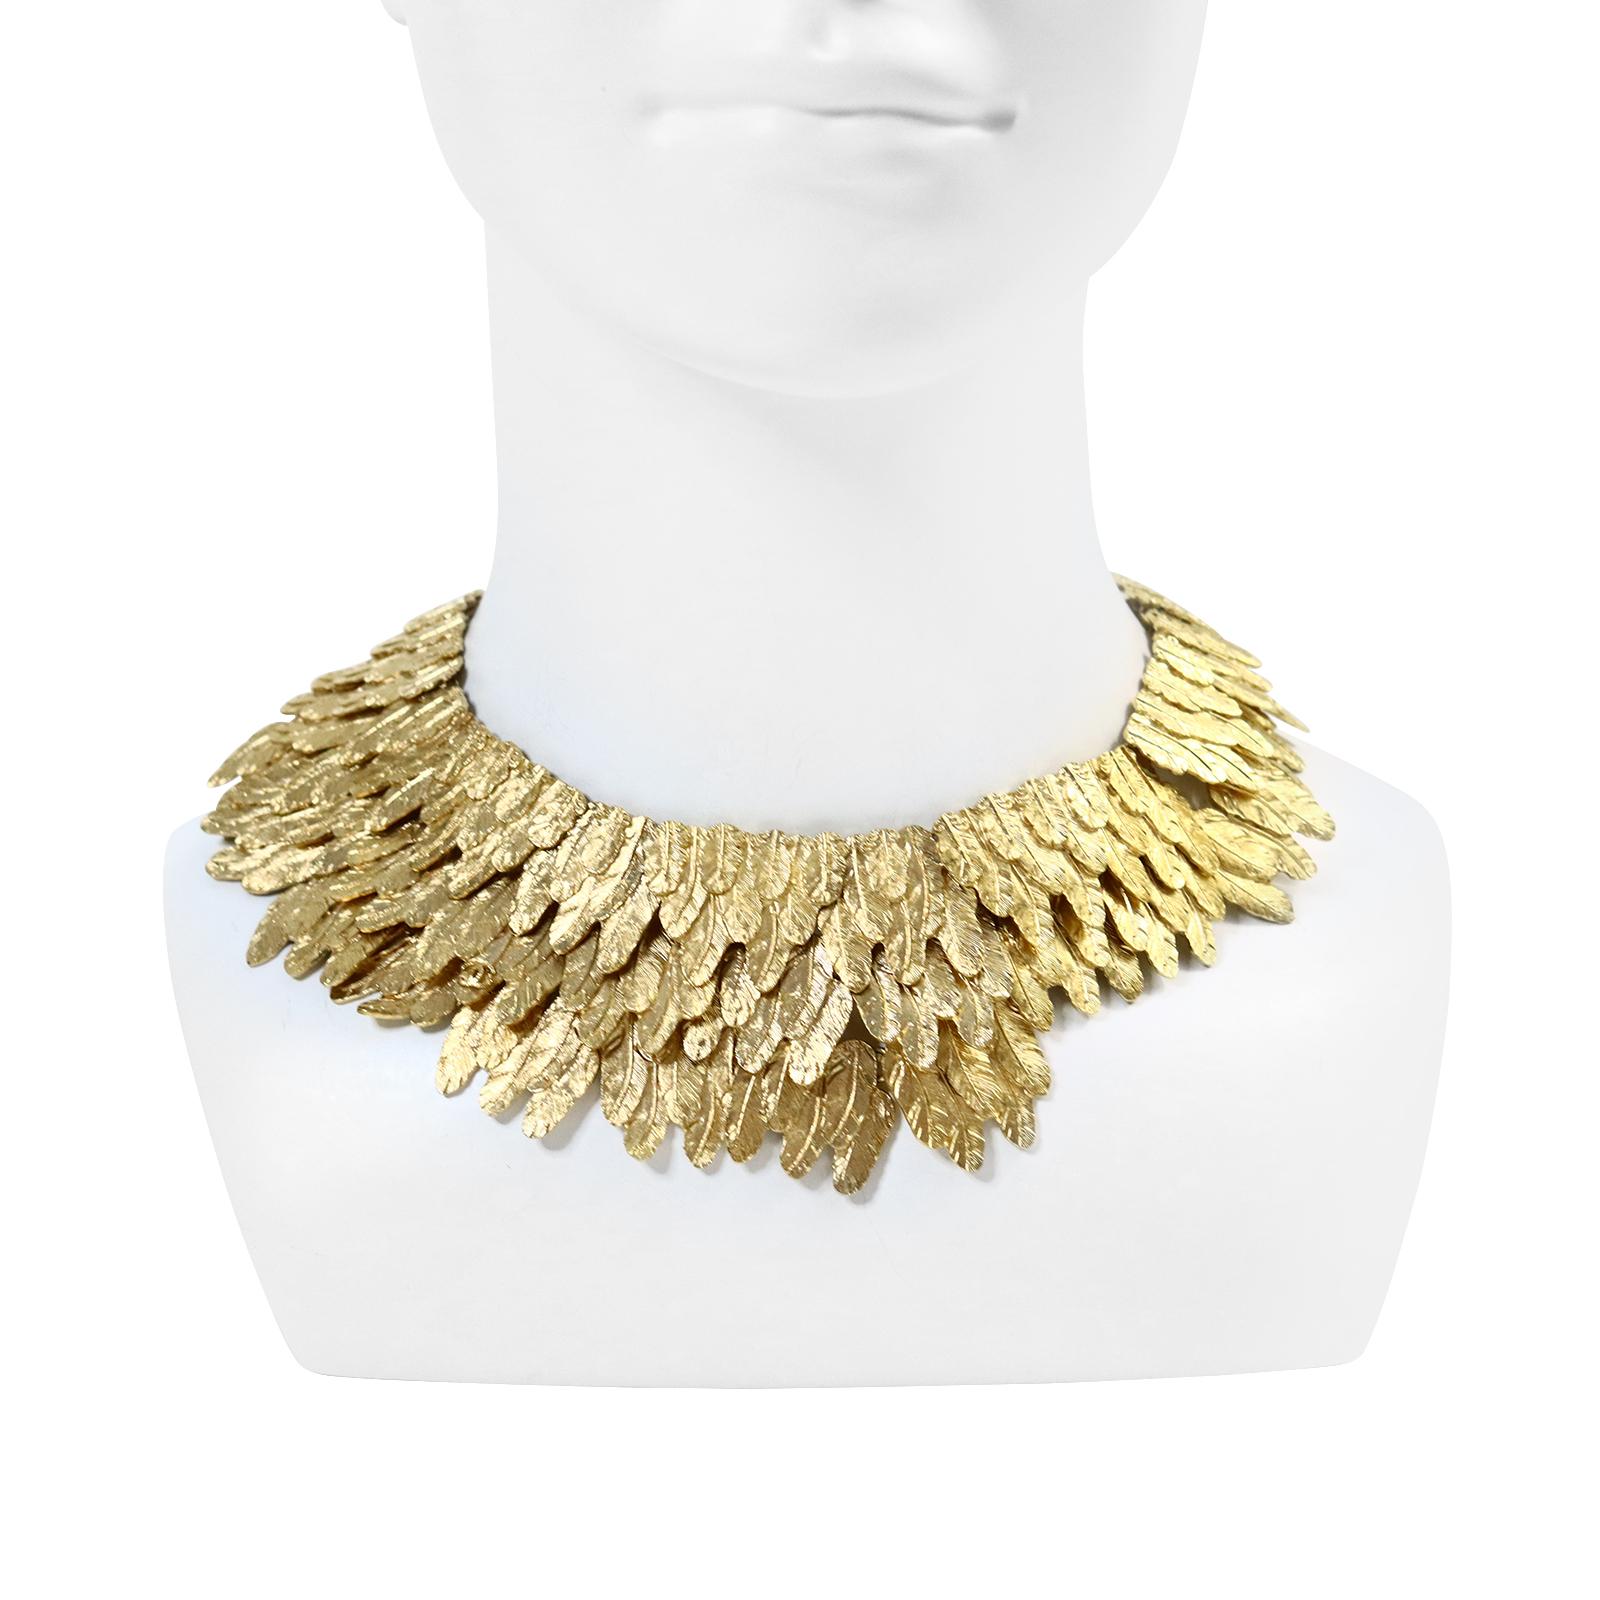 Artist Collectible Chanel Gold Choker Necklace Circa 2008 For Sale